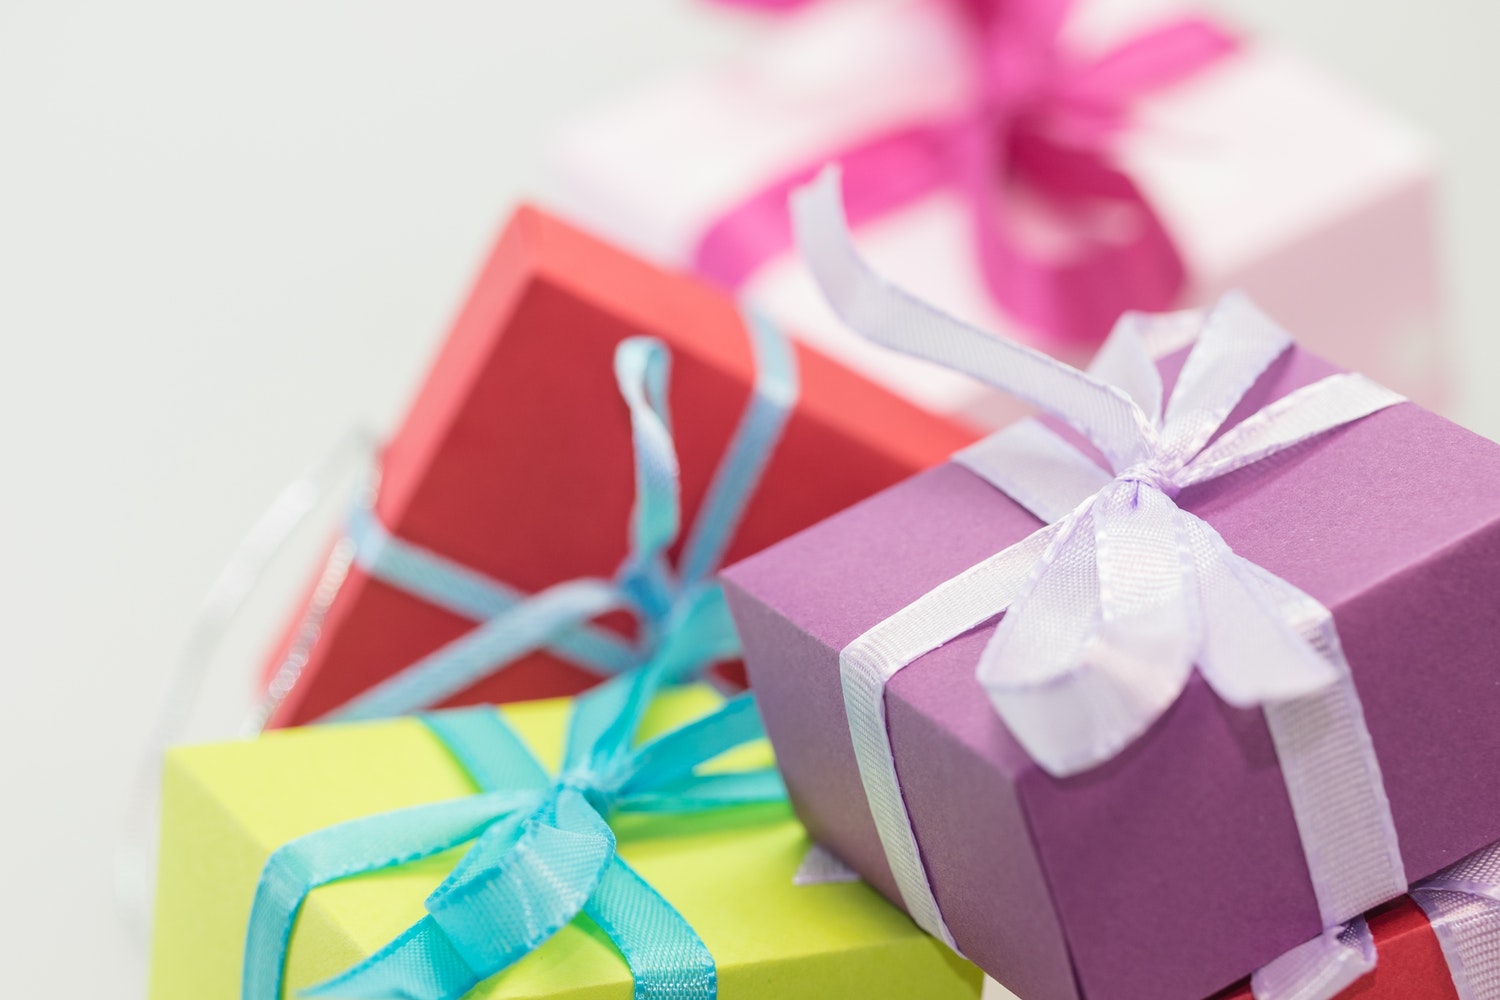 Colourful Gift Boxes Close up with Blurred White Background